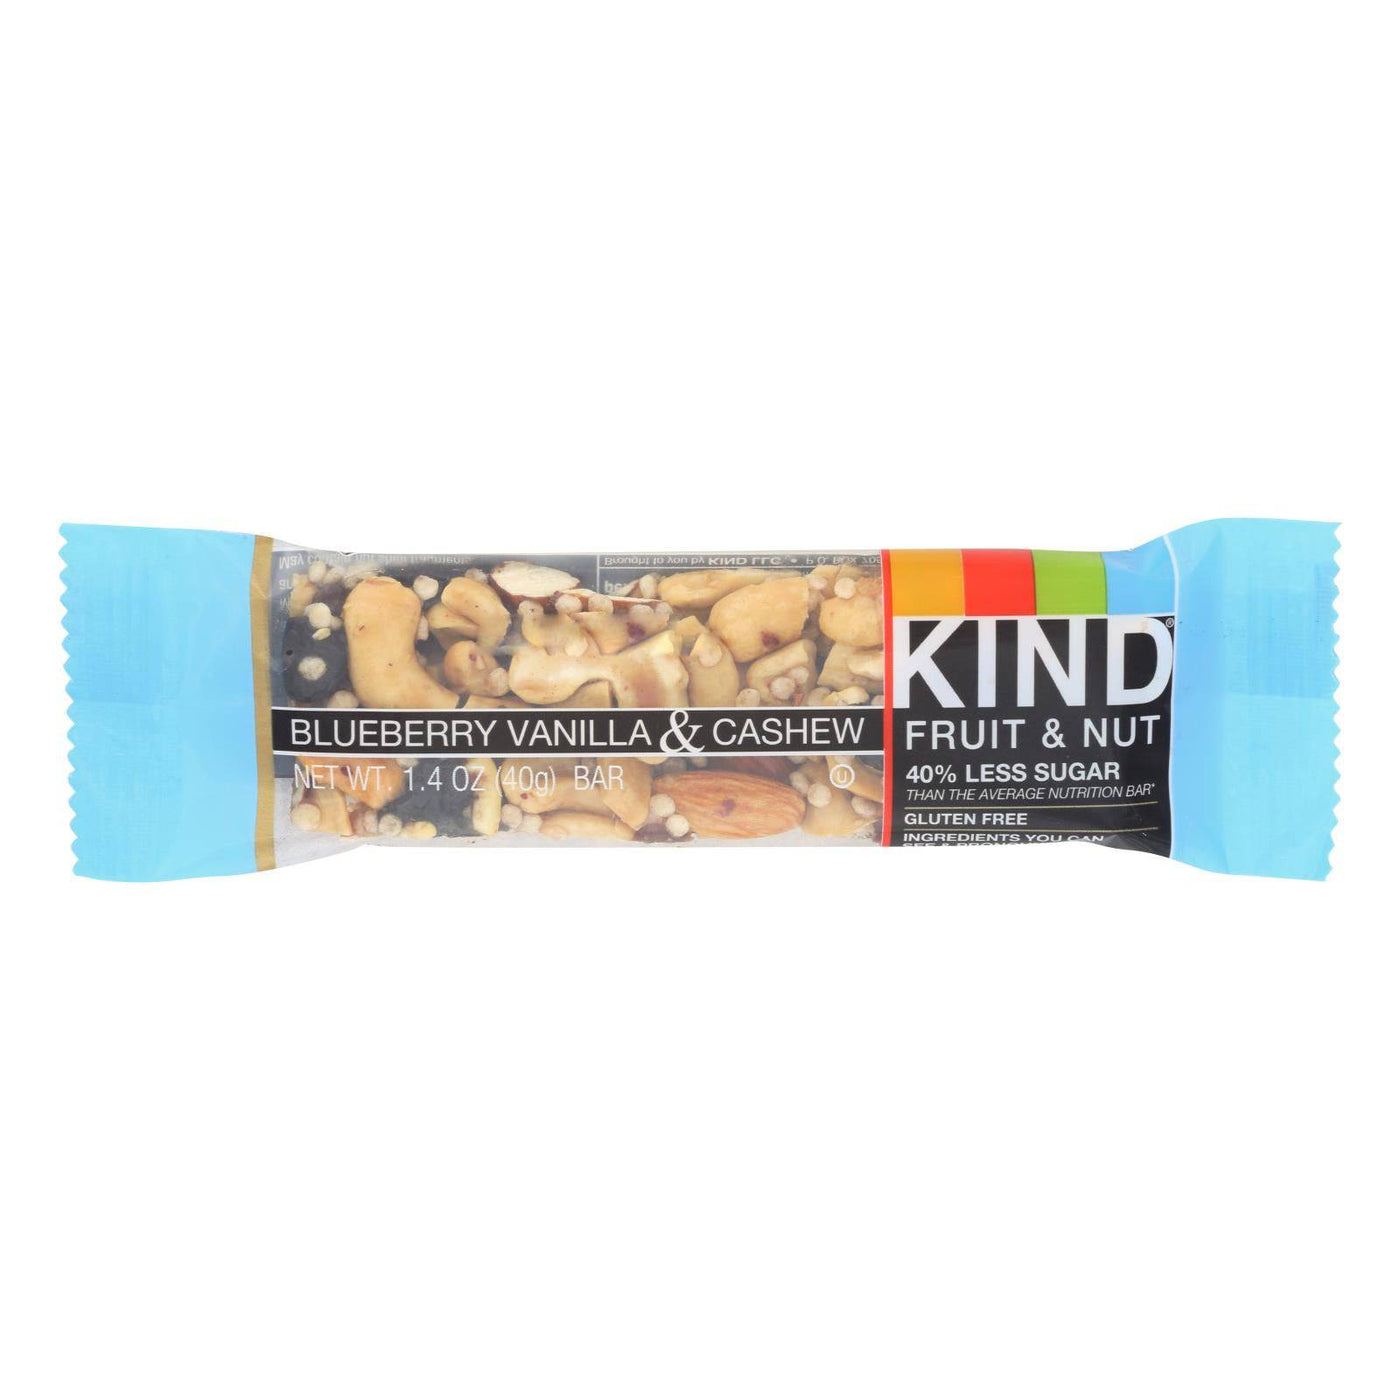 Buy Kind Bar - Blueberry Vanilla And Cashew - 1.4 Oz Bars - Case Of 12  at OnlyNaturals.us